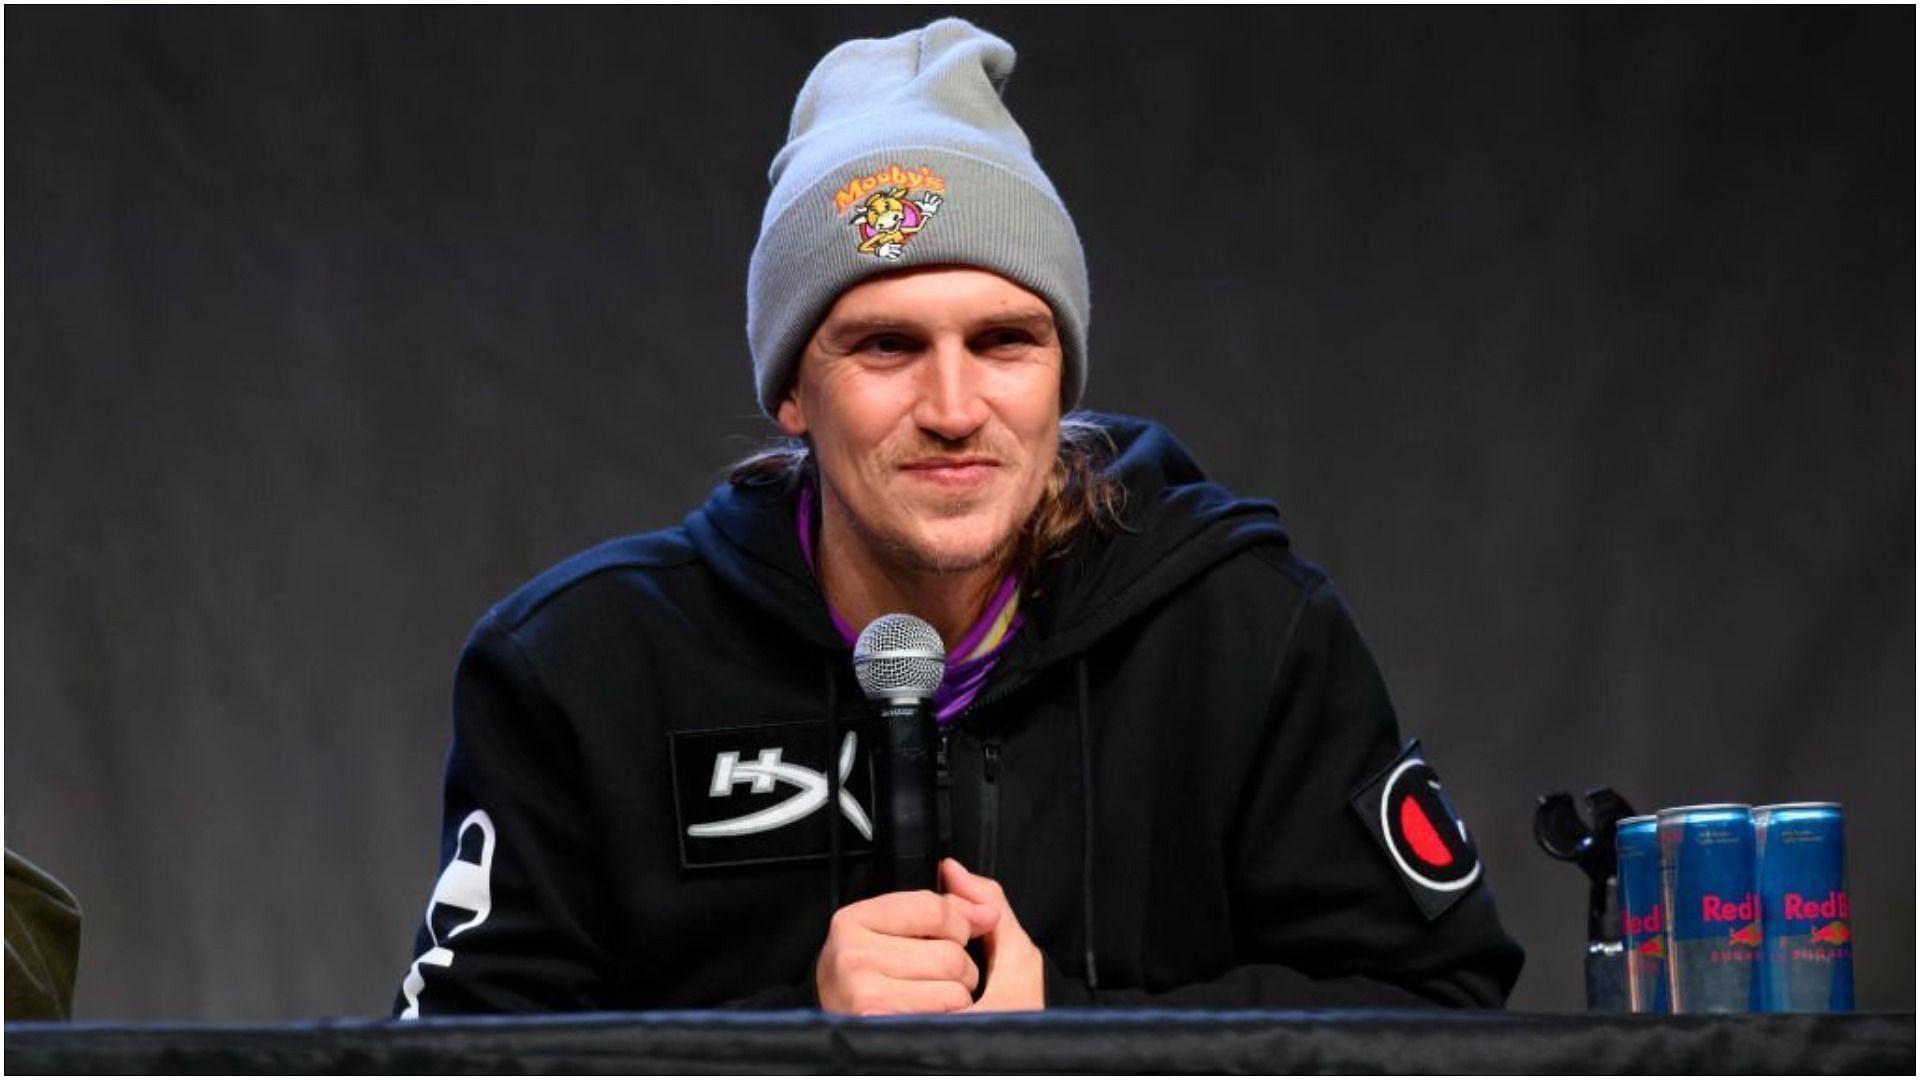 Jason Mewes opened up about his substance addiction on a podcast (Image via Daniel Boczarski/Getty Images)